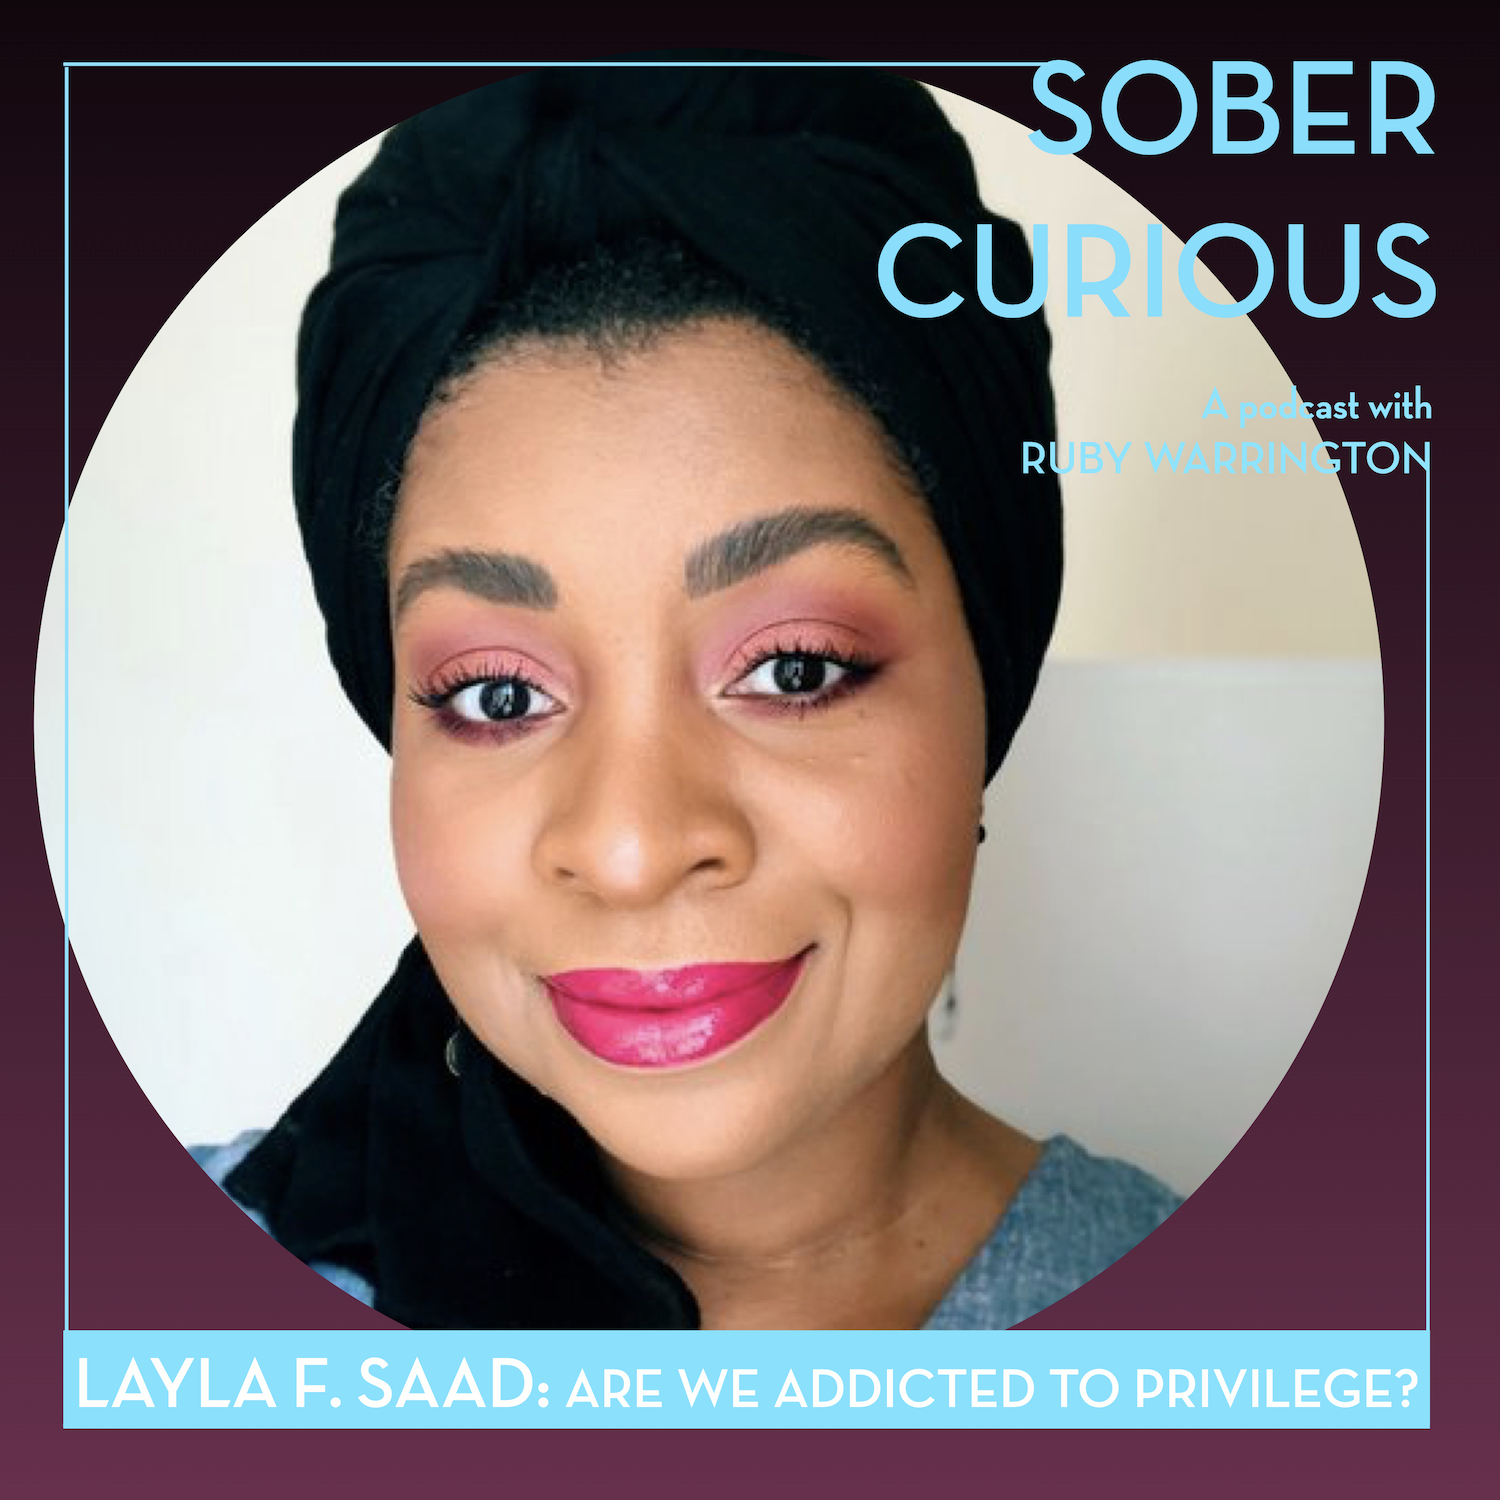 Layla F. Saad Sober Curious podcast Ruby Warrington Me And White Supremacy